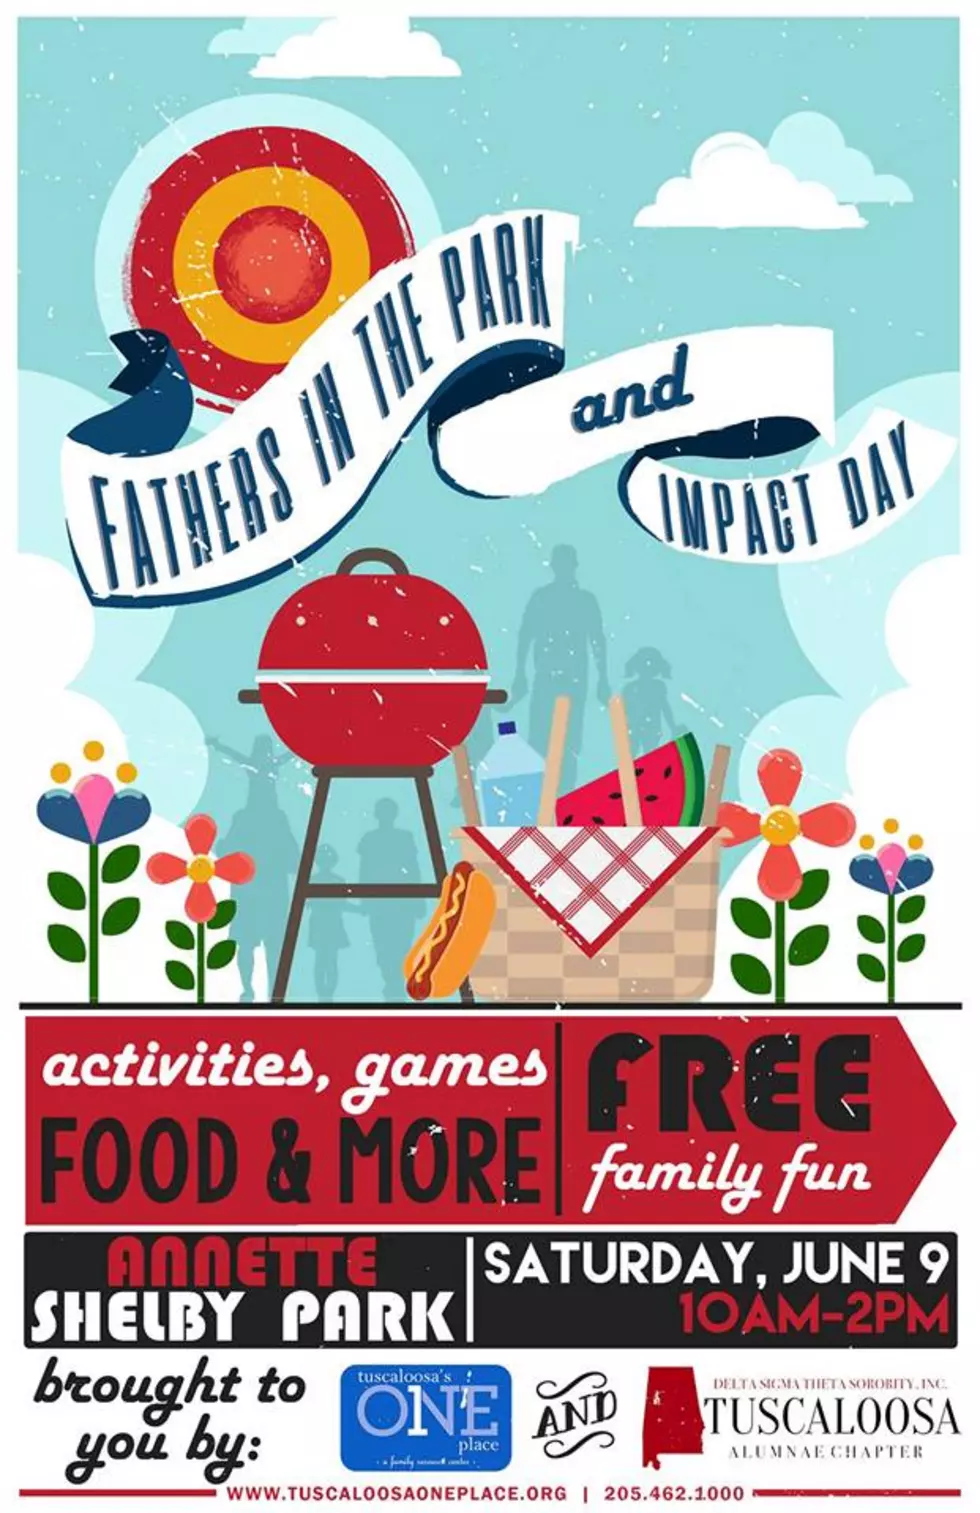 Tuscaloosa’s One Place to Host Fathers in the Park and Impact Day Saturday, June 9, 2018